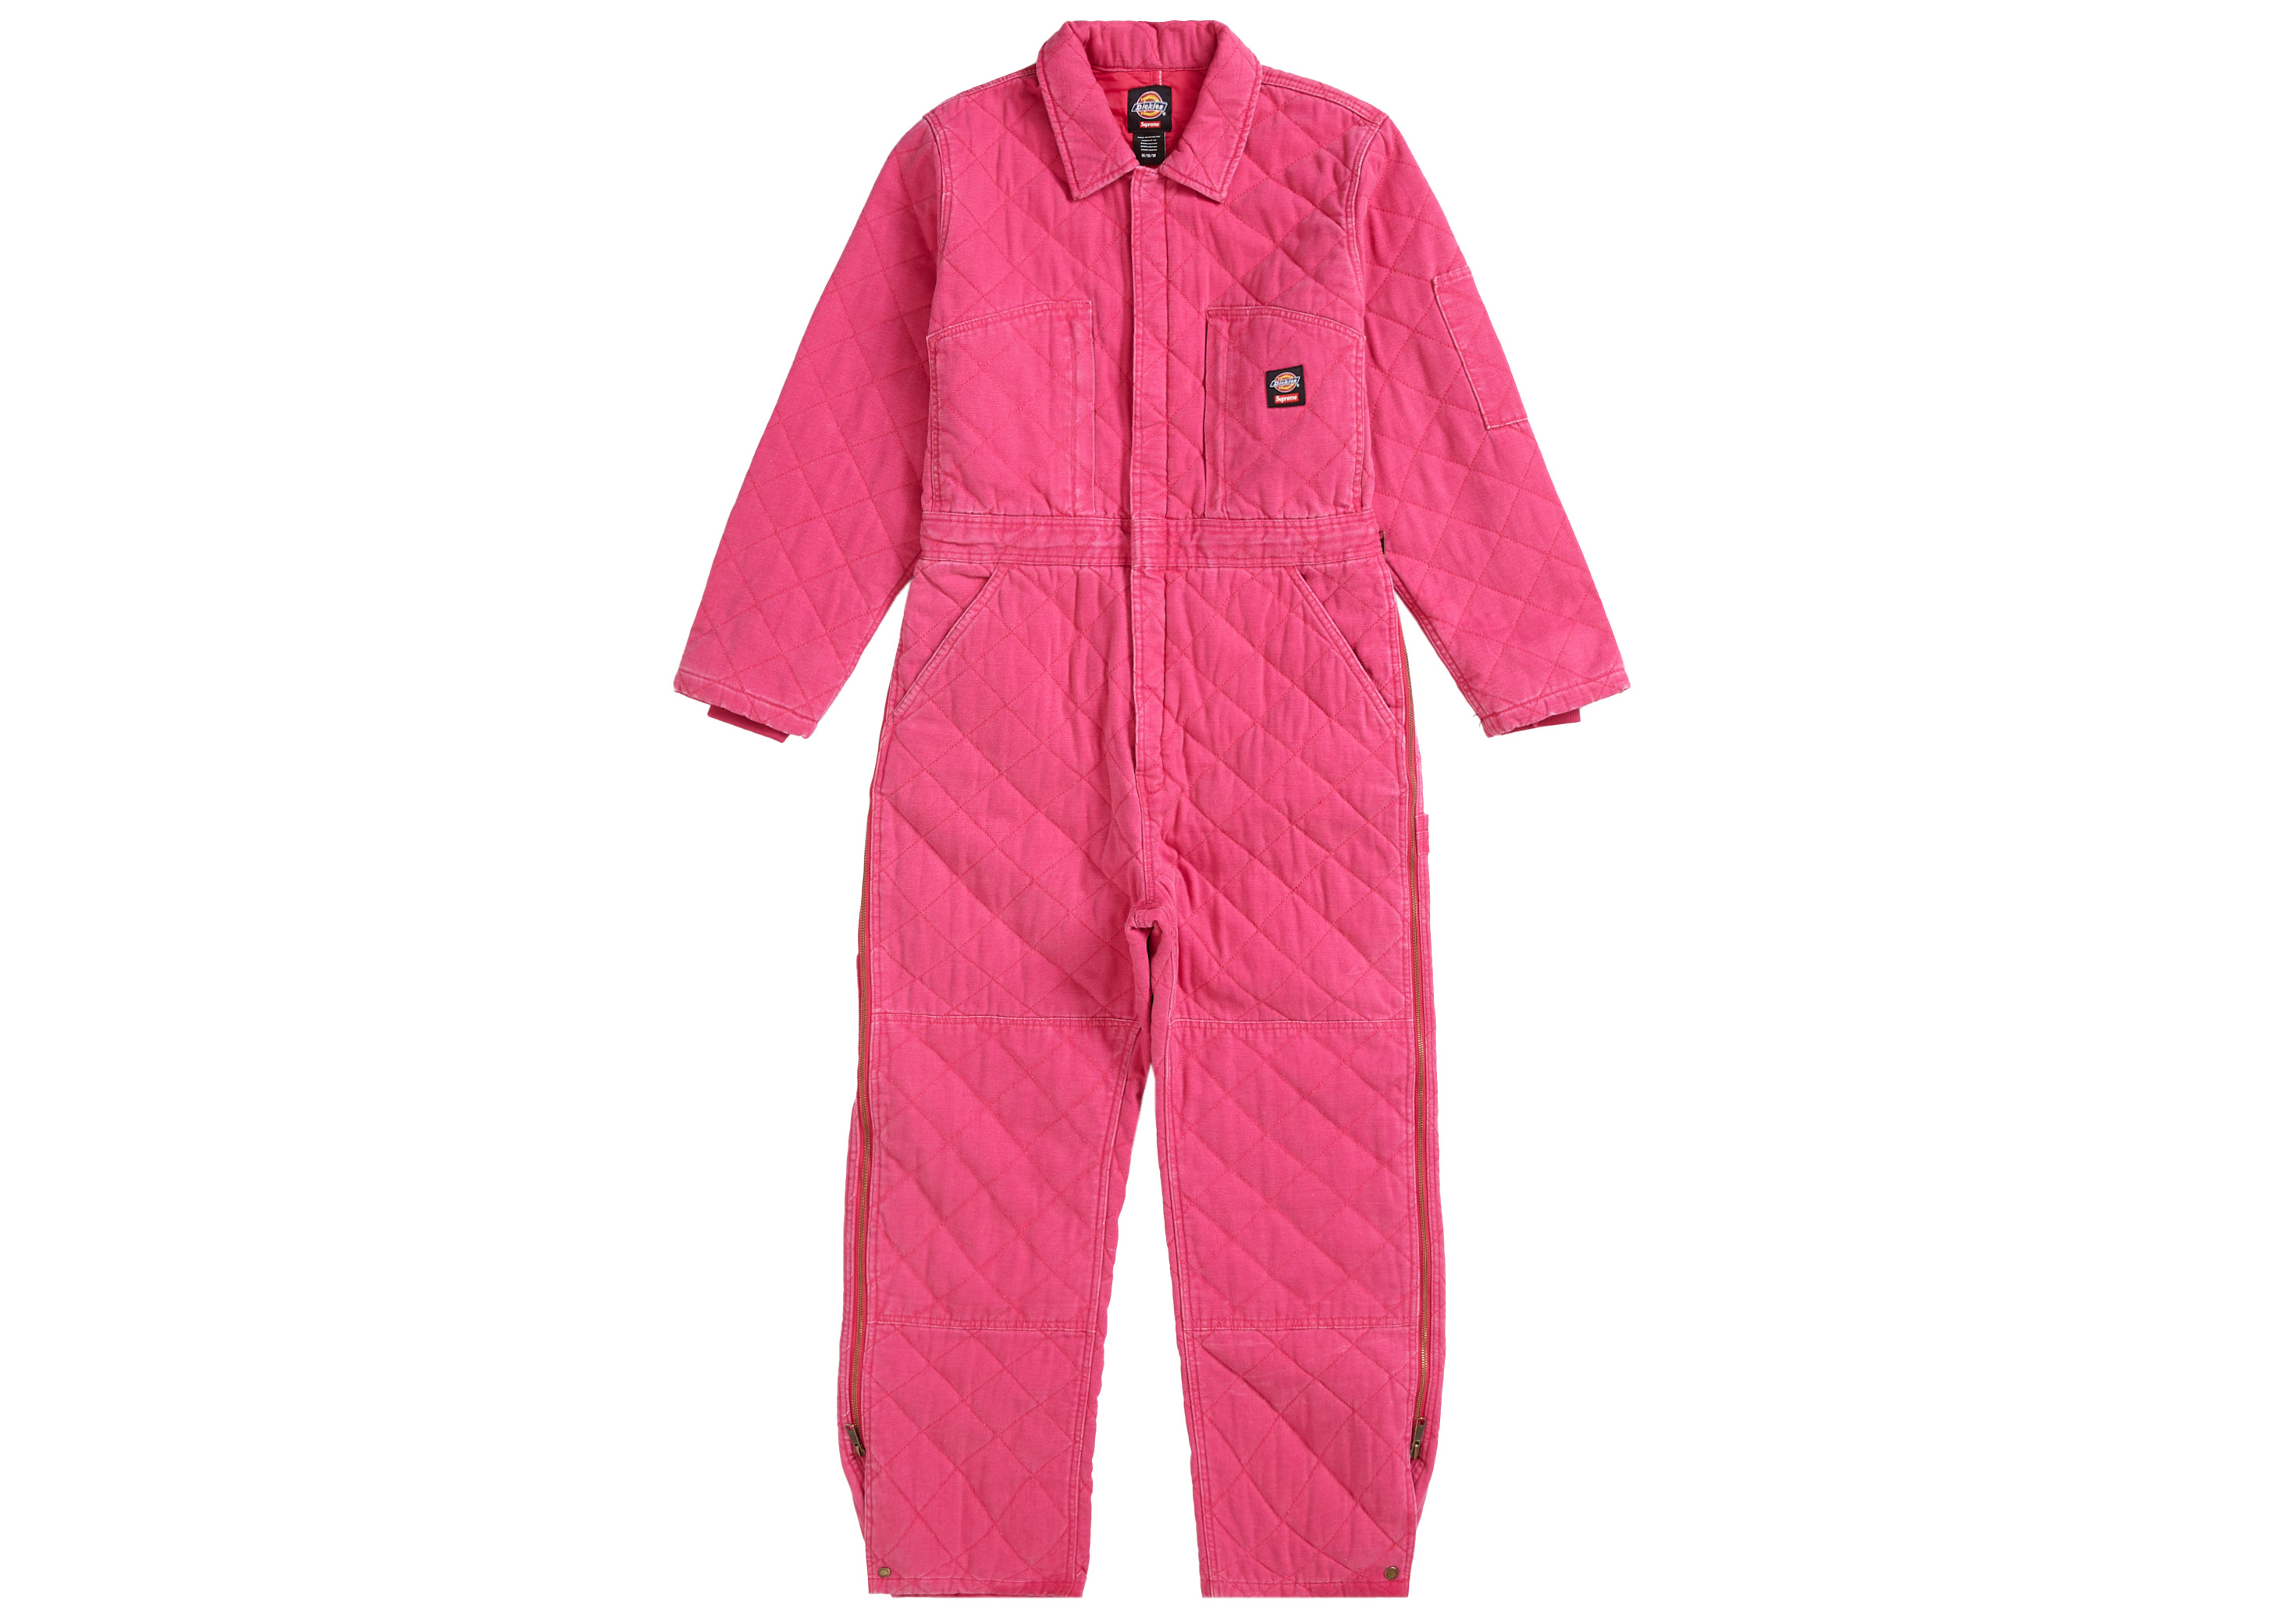 Supreme x Dickies Quilted Denim Coverall Pink - Novelship